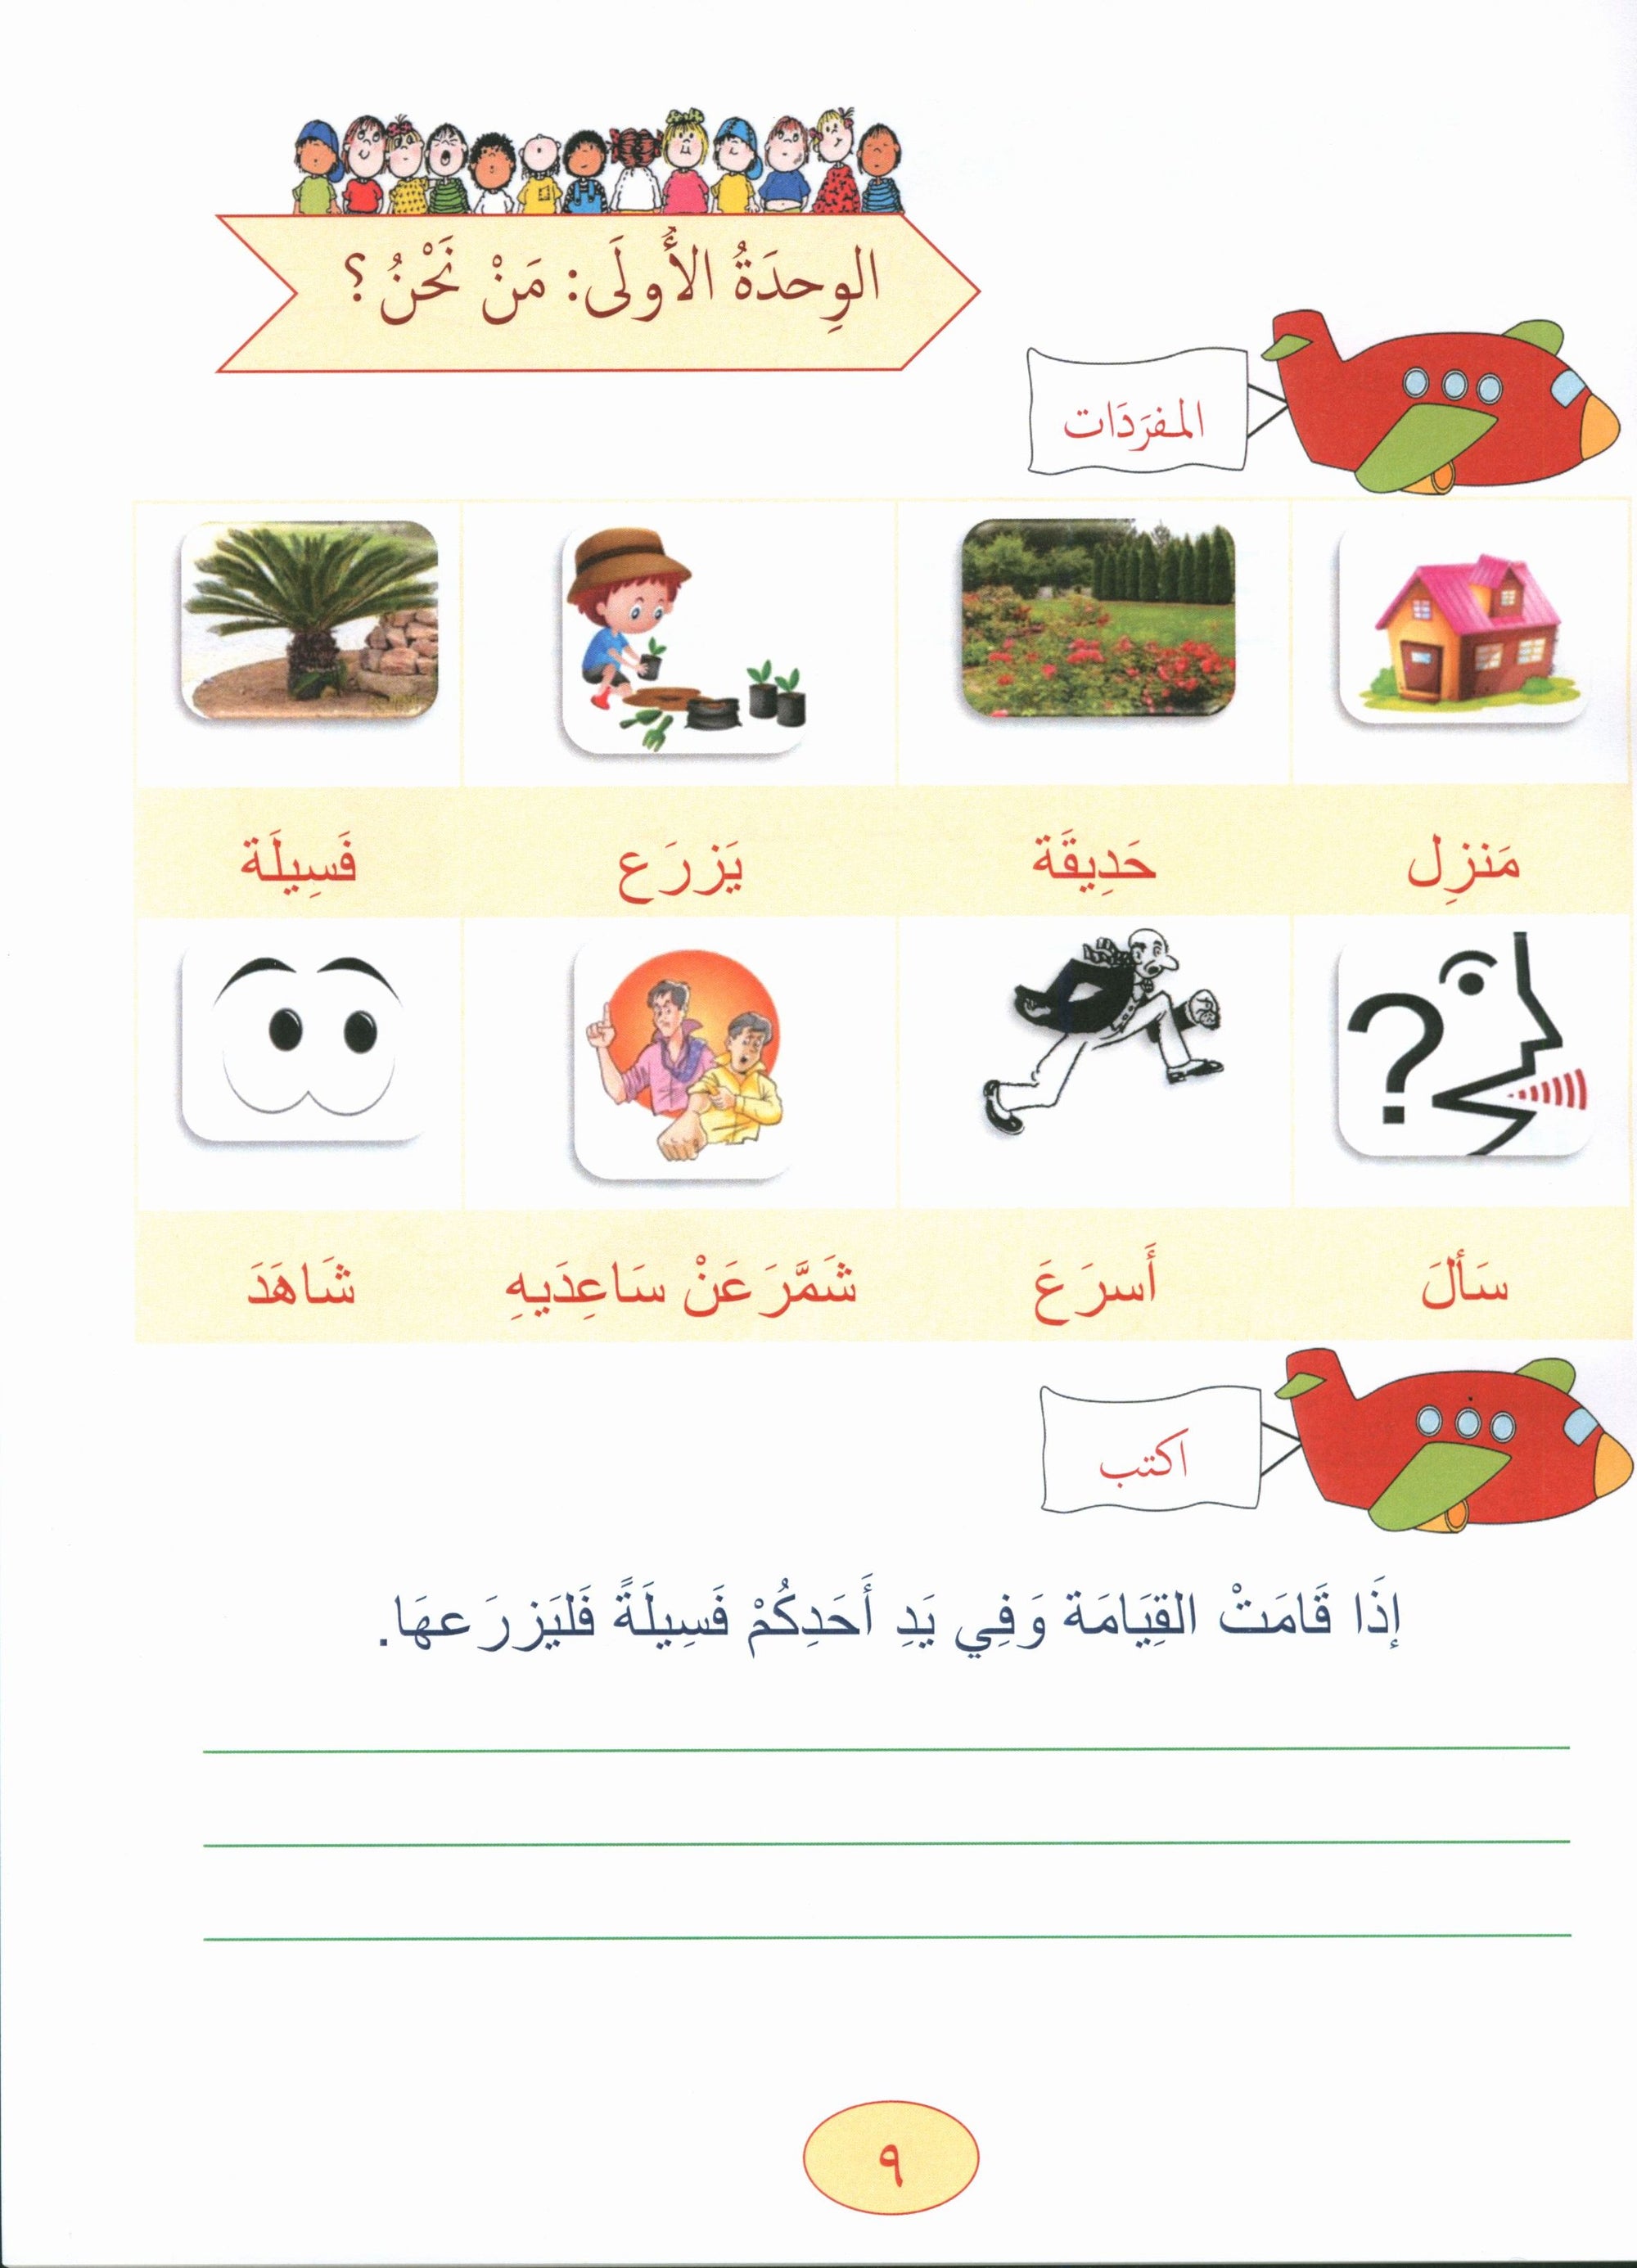 Our Language Is Our Pride Reading Level 2 لغتنا فخرنا